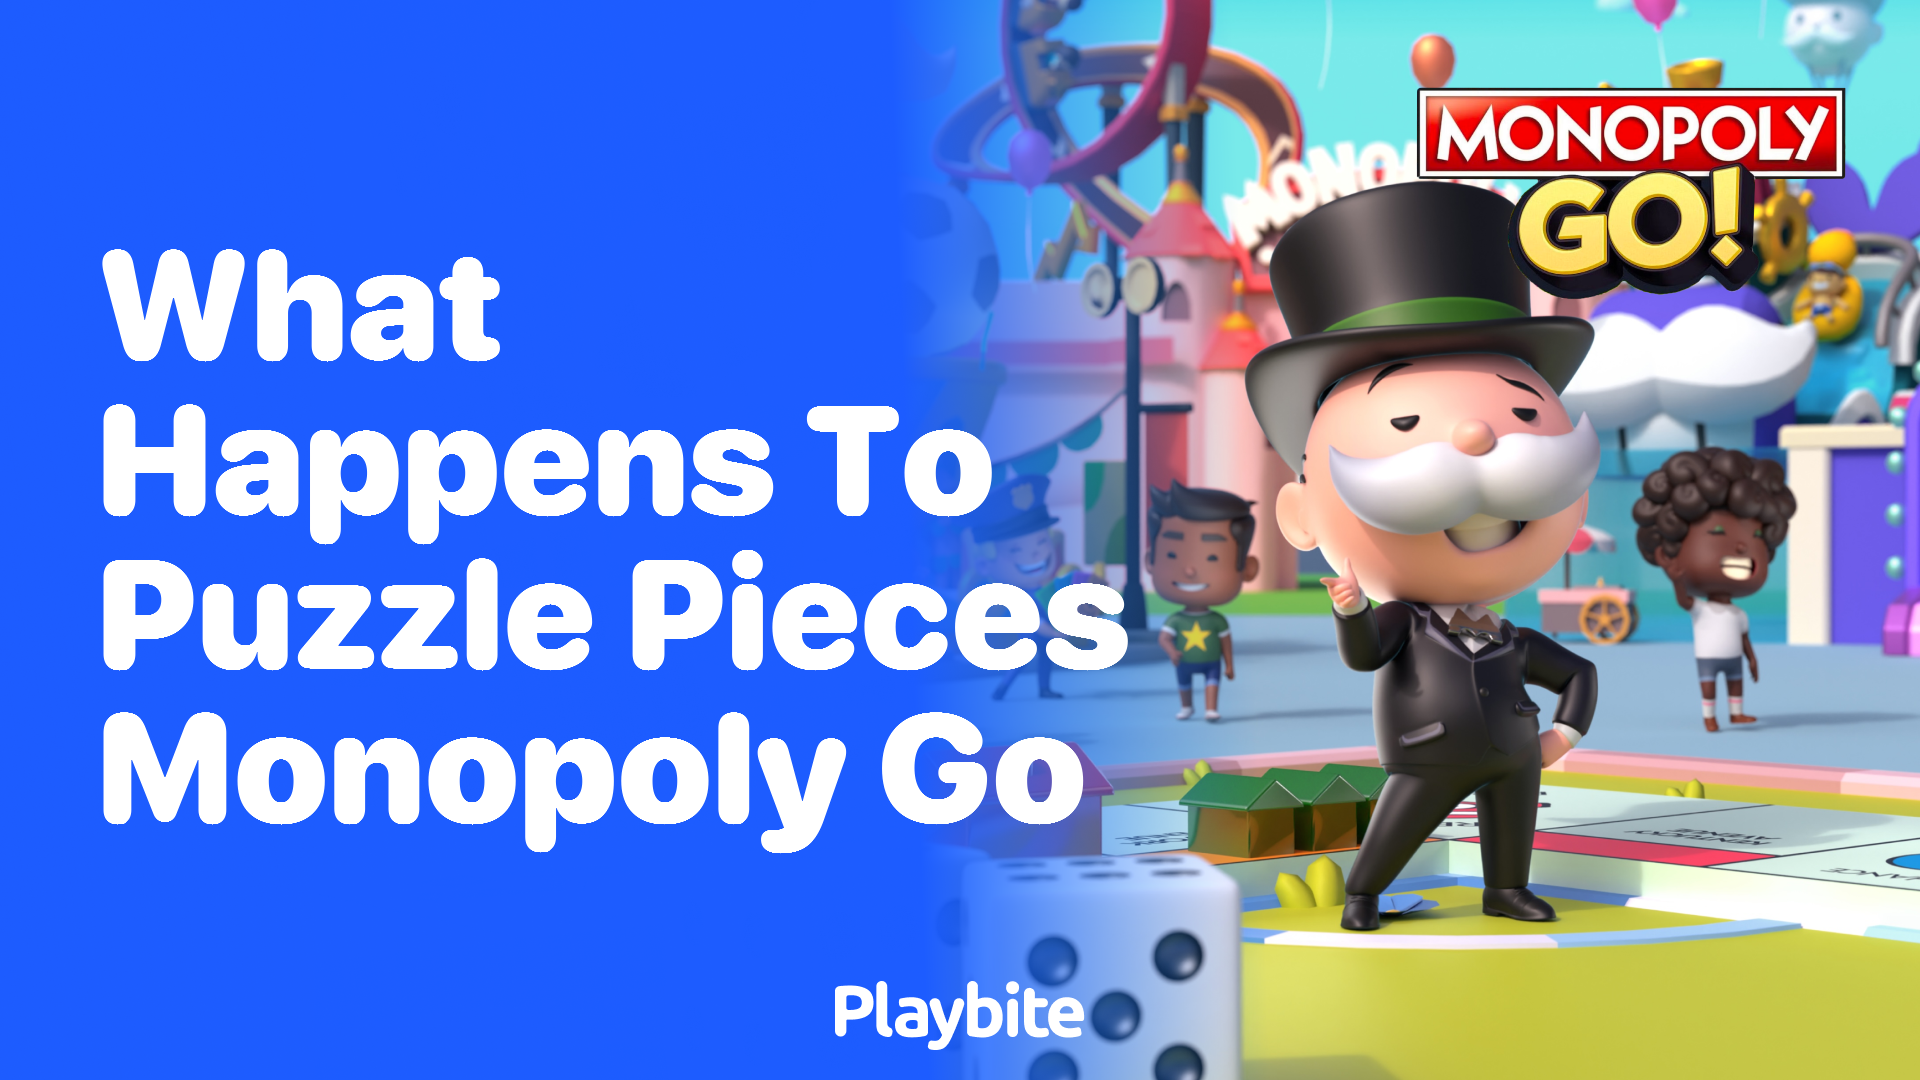 What Happens to Puzzle Pieces in Monopoly Go?